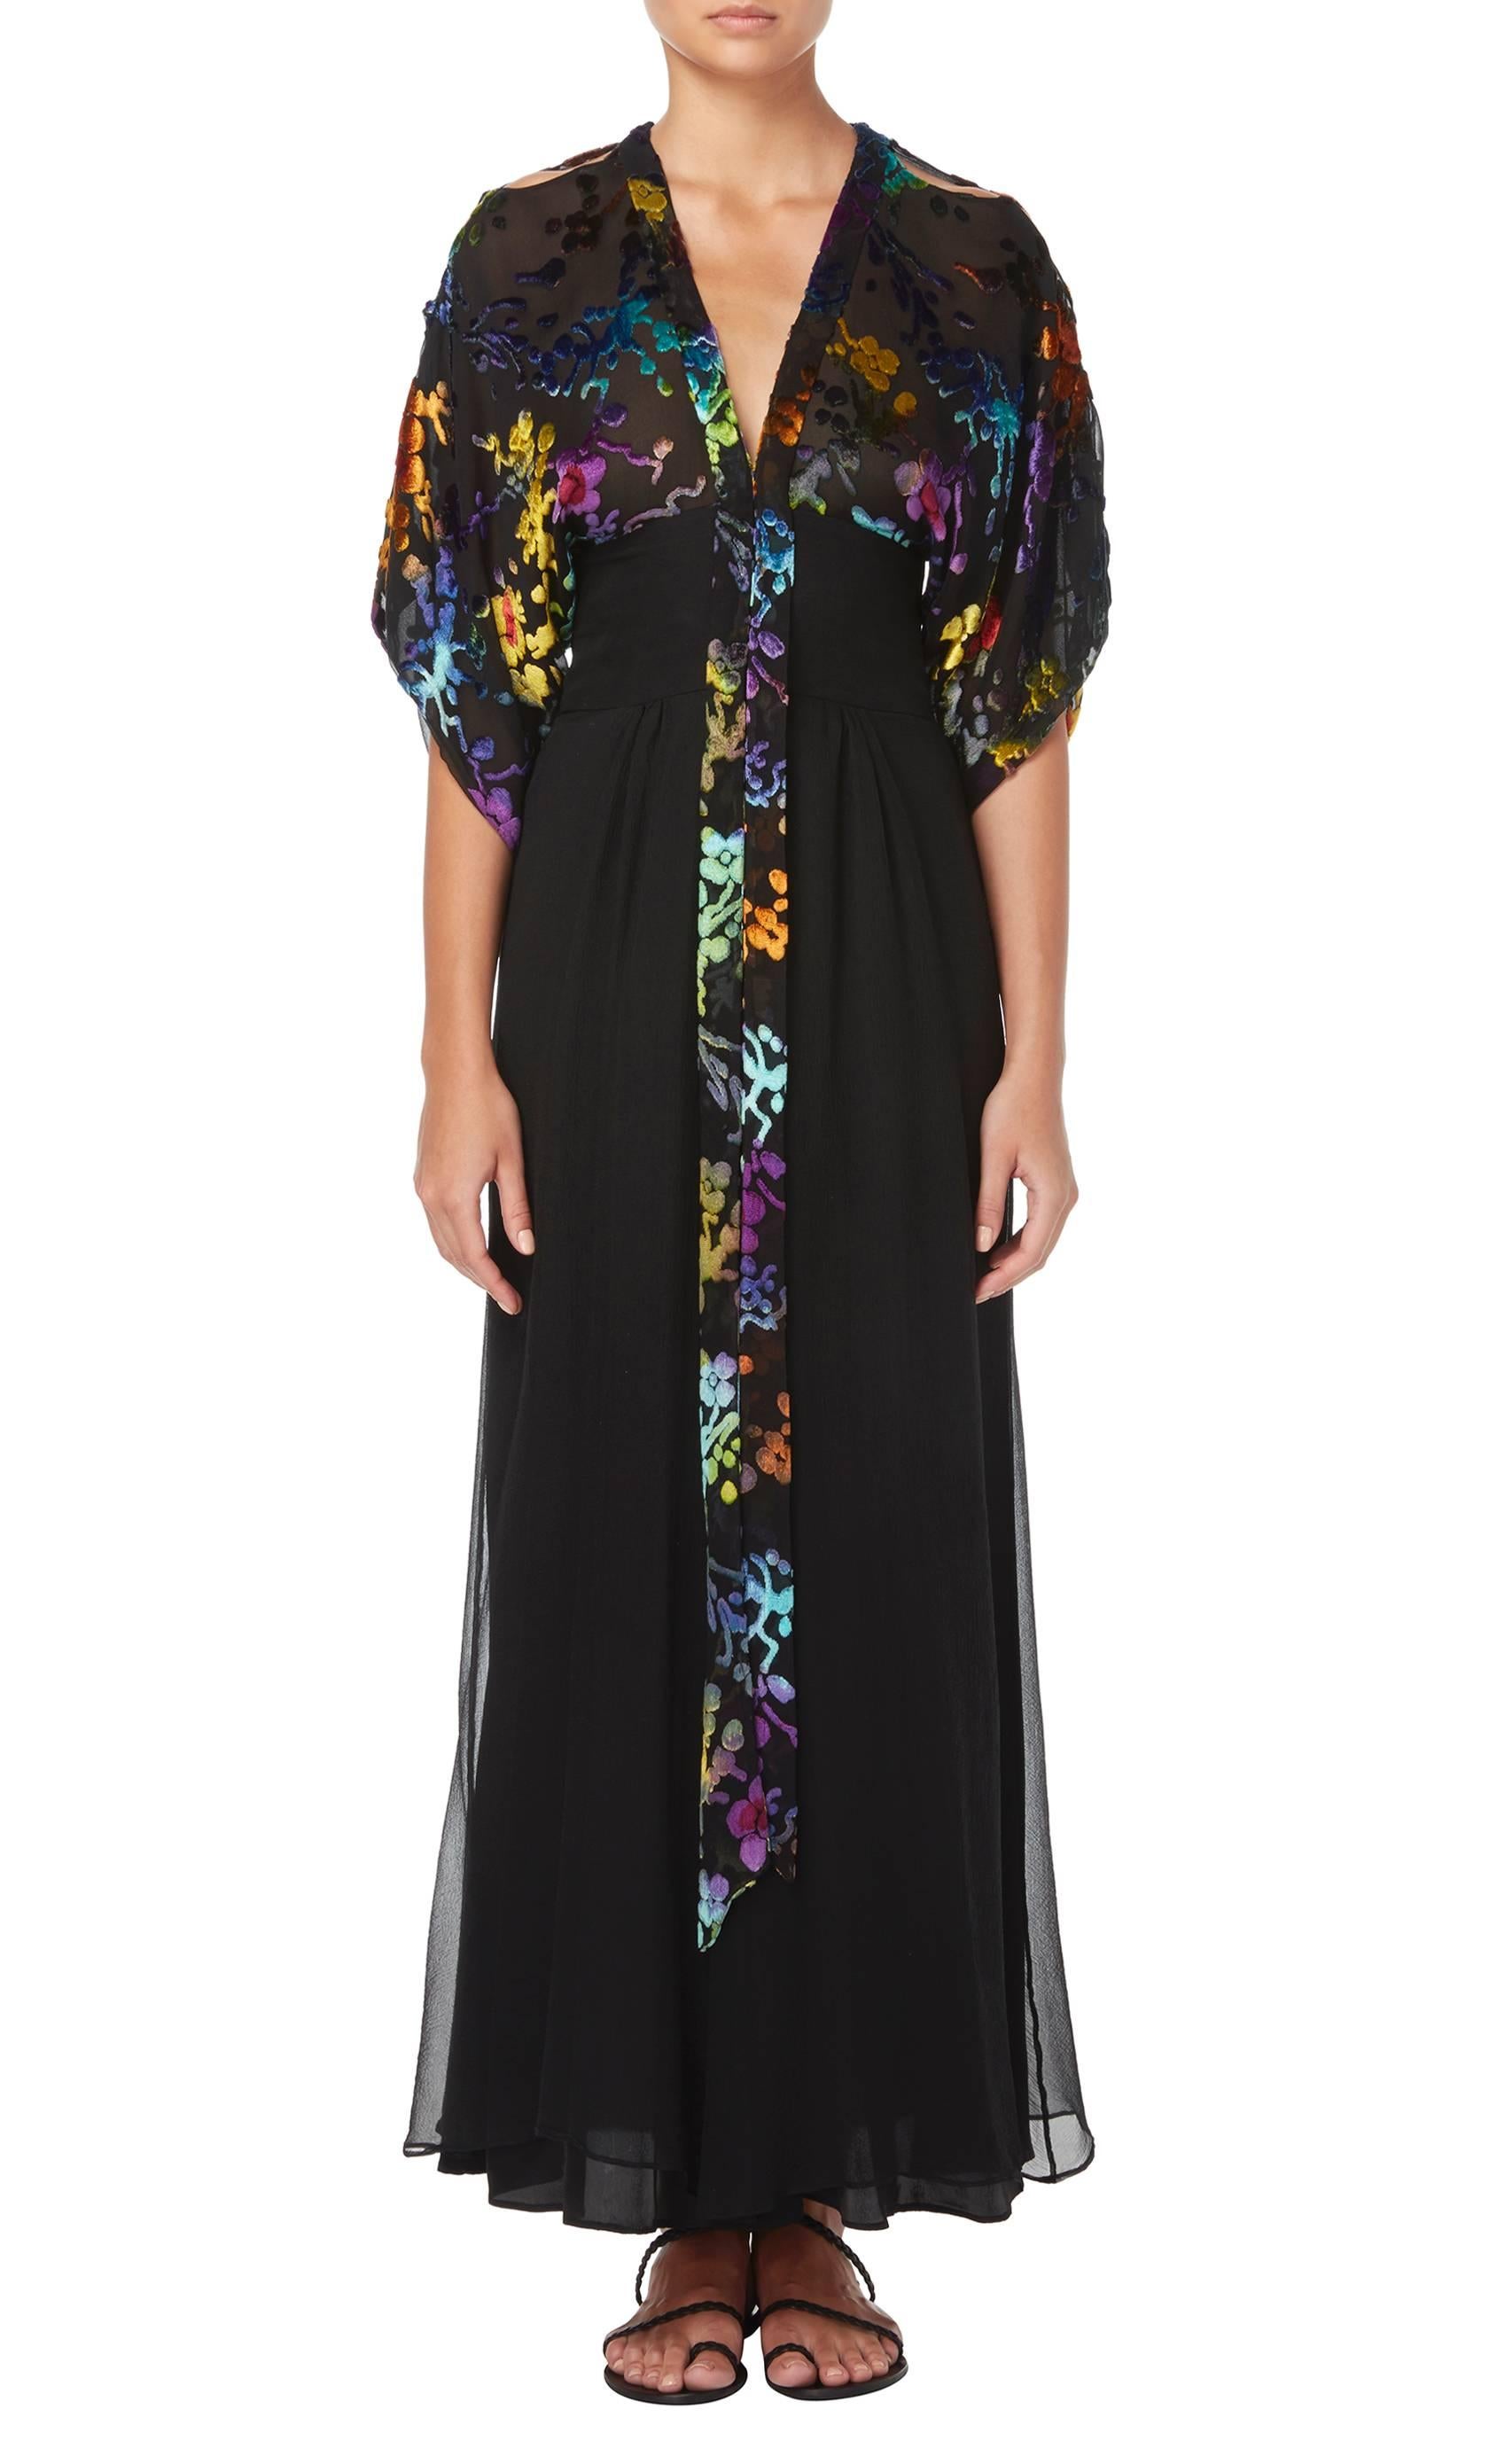 A beautiful piece of Thea Porter couture, this dress is a stunning option for a cocktail party. The bodice of the dress features a rainbow floral pattern in devor̩é, while the wide sleeves are split from the shoulder to reveal the arm. The skirt is